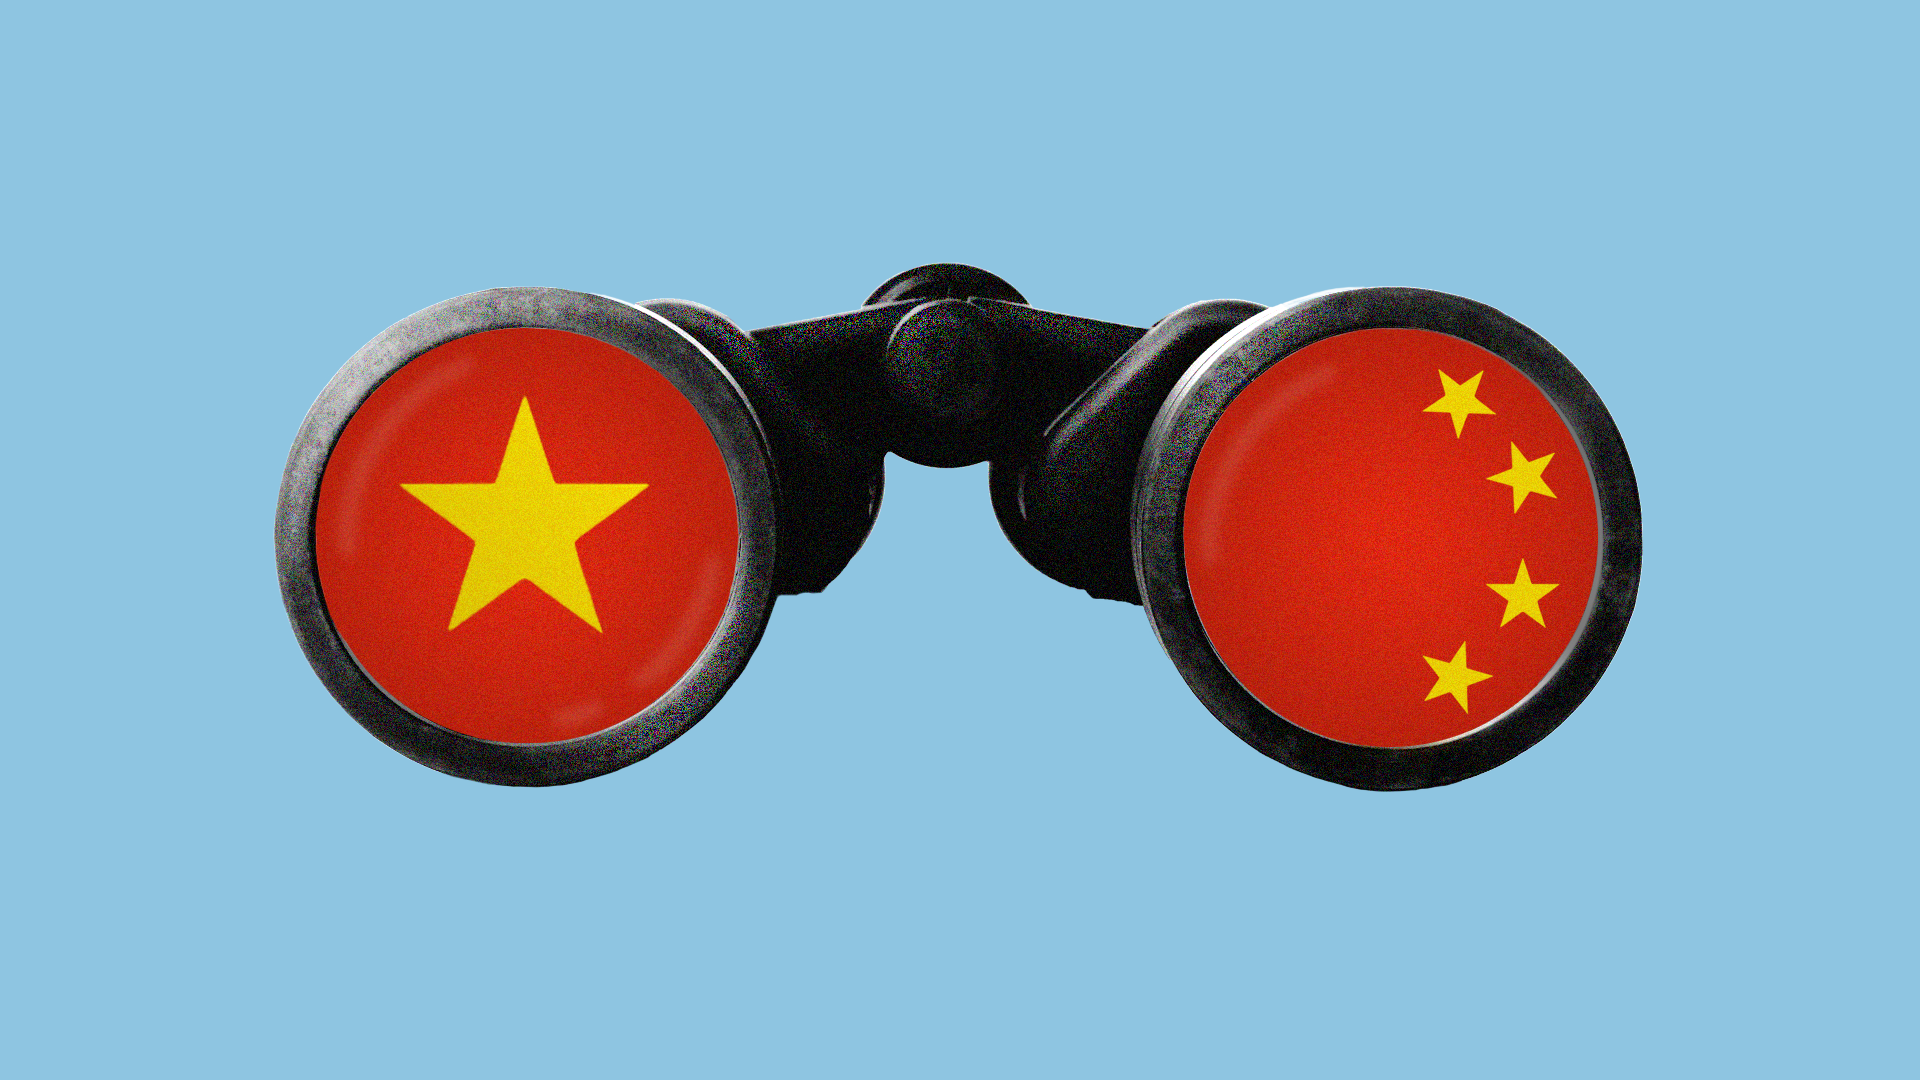 Binoculars with China flag in lenses